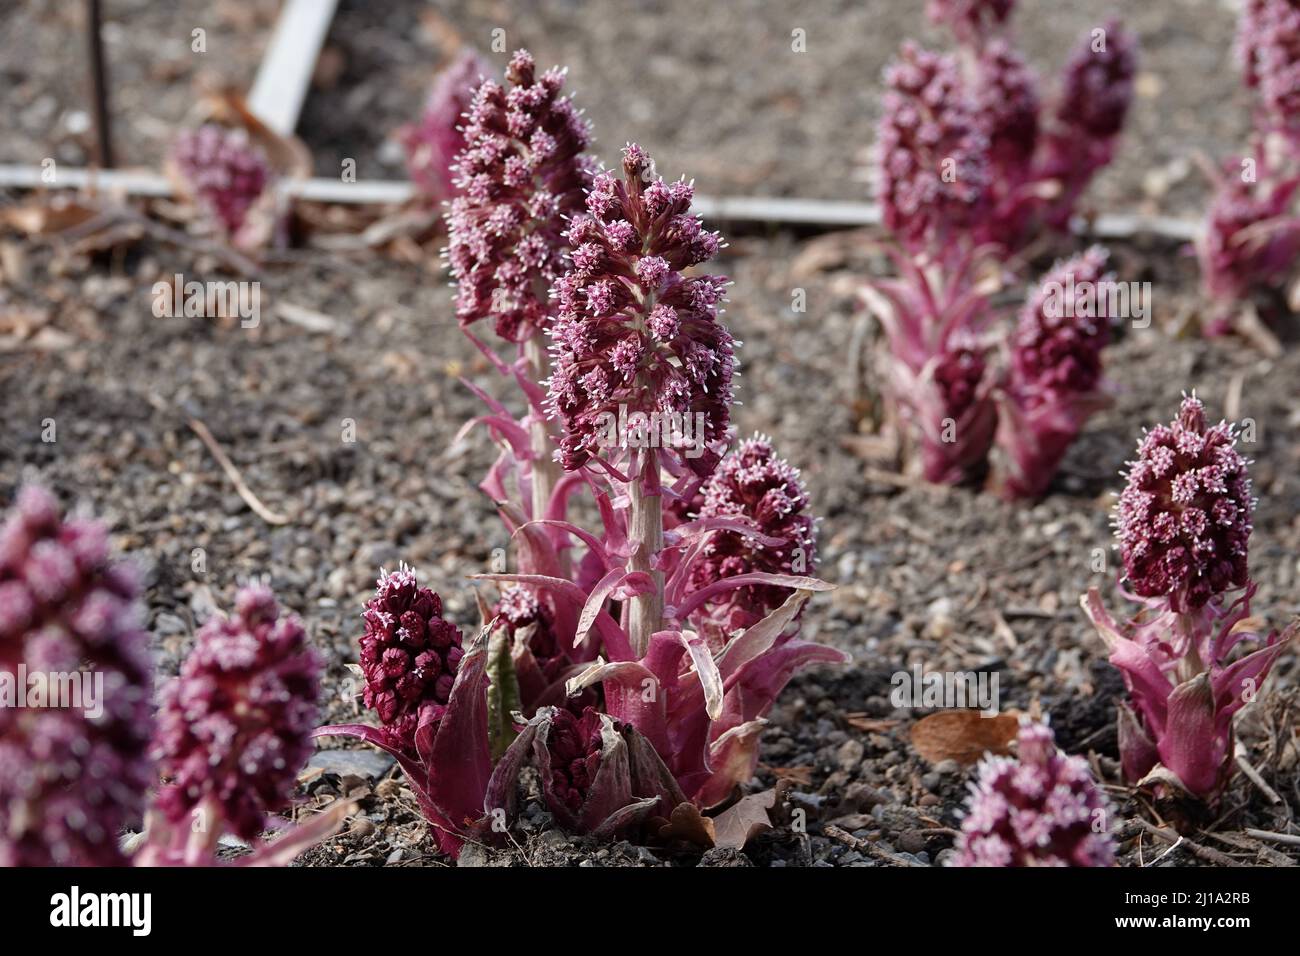 Detail of a beautifully blooming petasites hybridus with white-purple flowers. Stock Photo